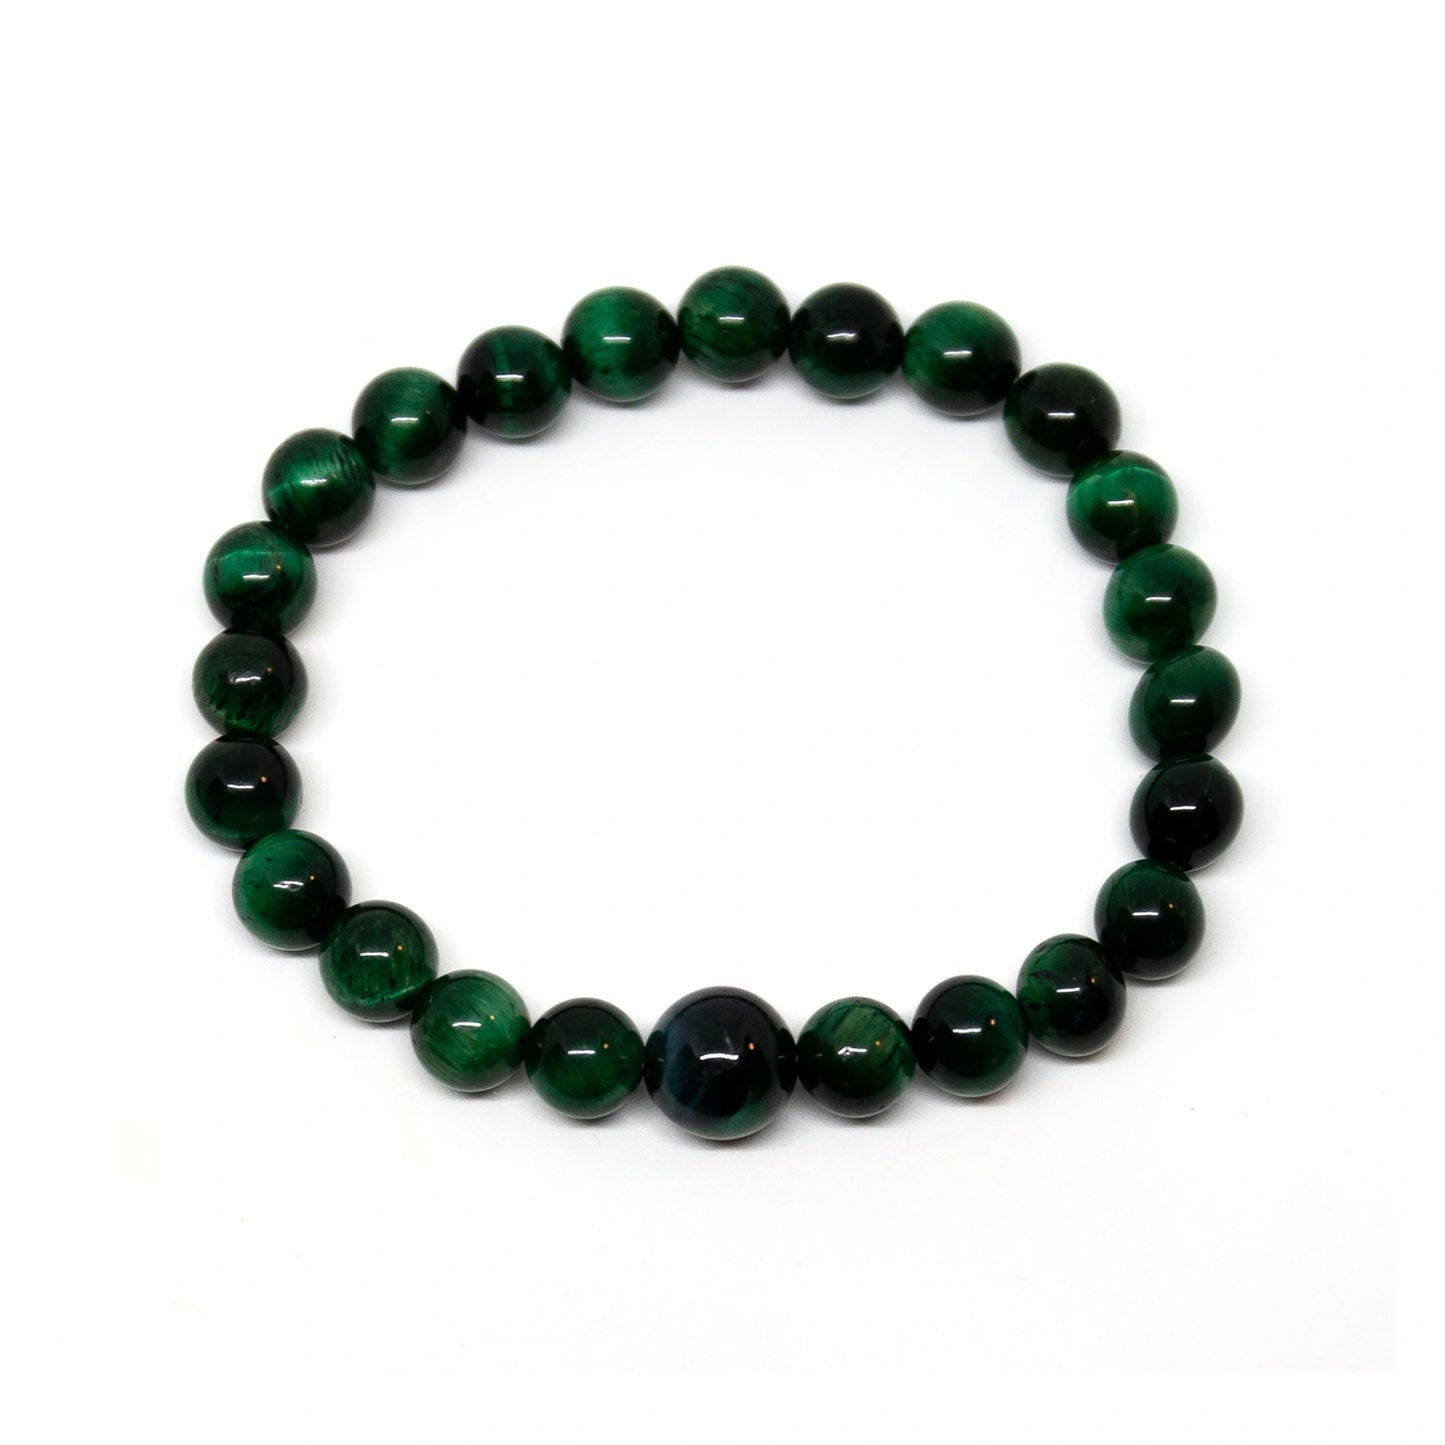 High Quality Dyed Green Tiger's Eye Beaded Bracelet - 8mm (2 Pack)